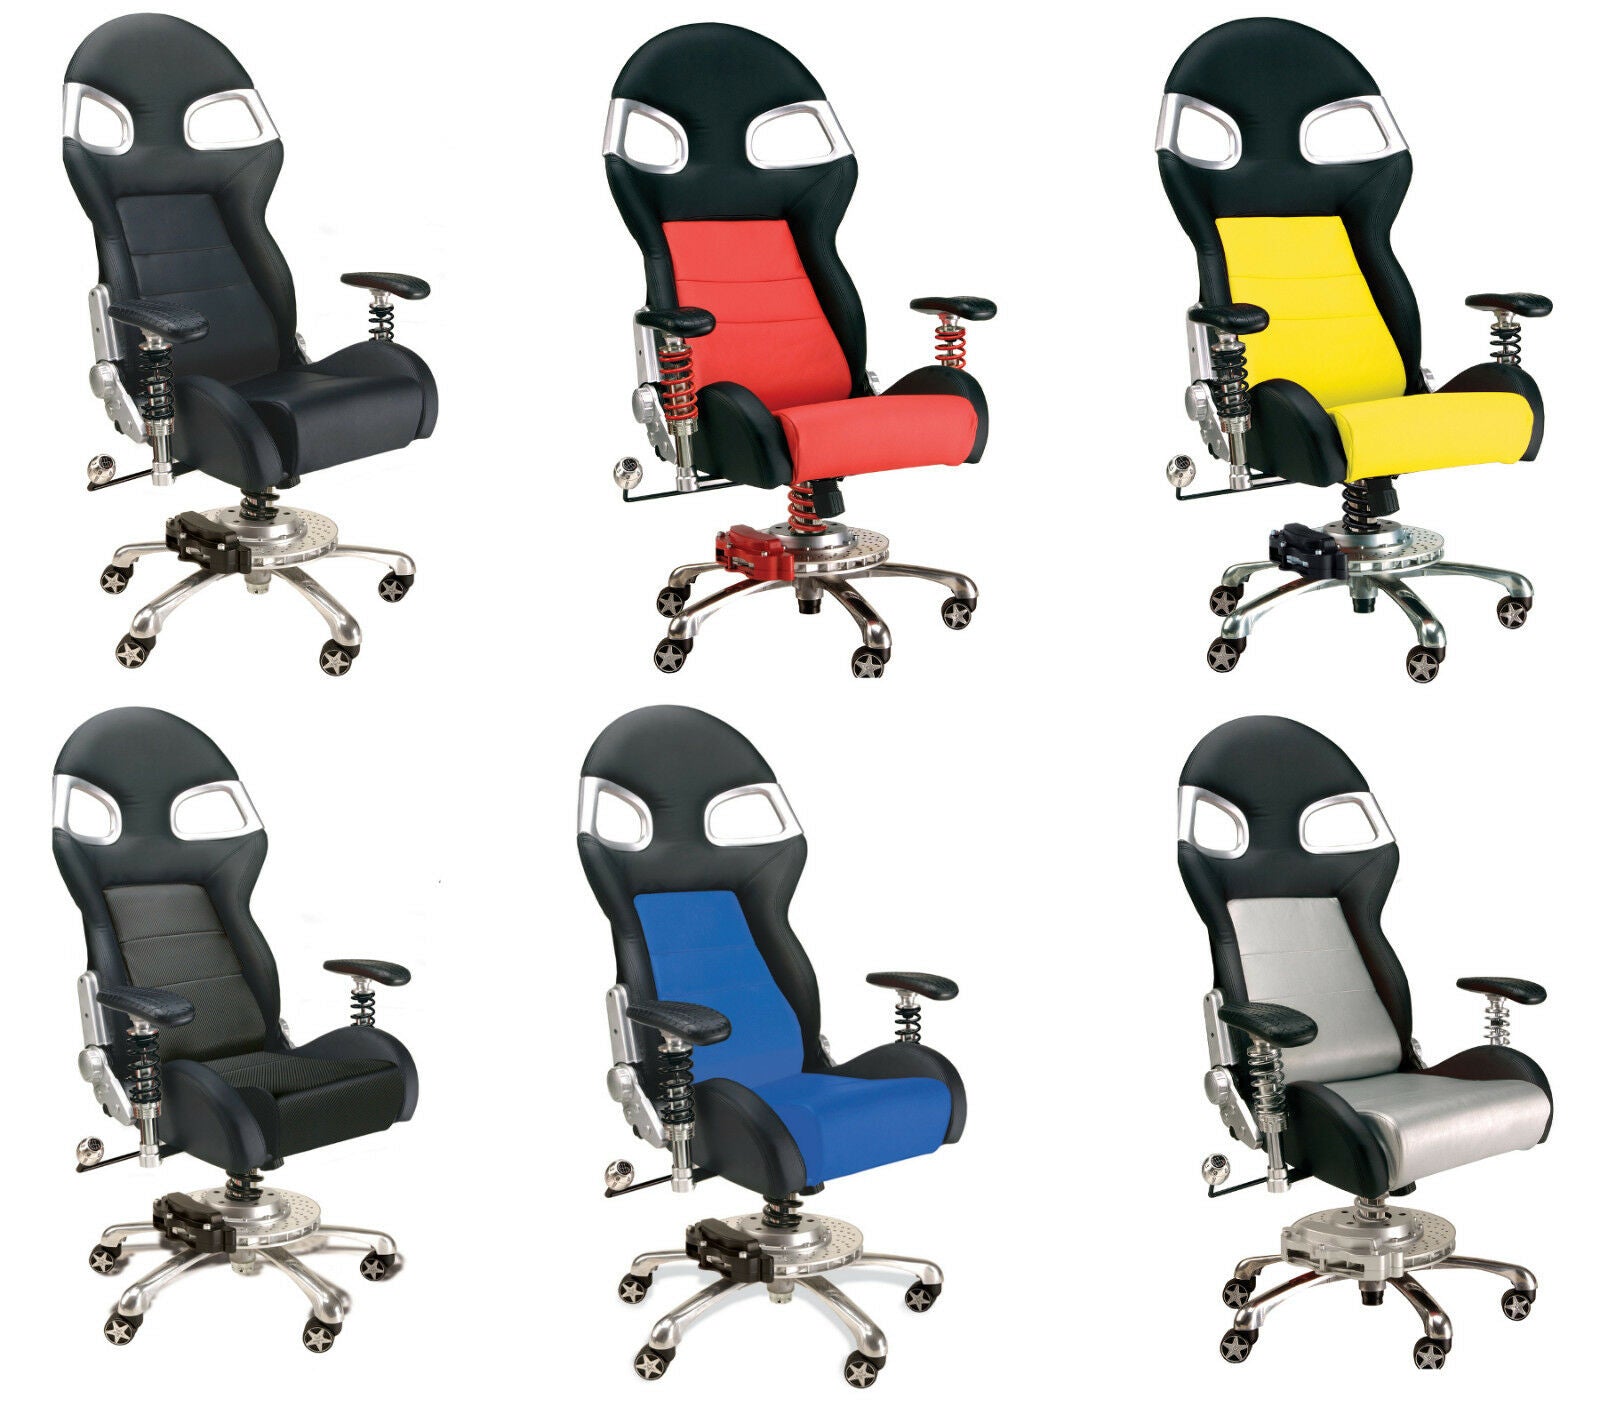 Pitstop LXE High Back Automotive Themed Office Chair